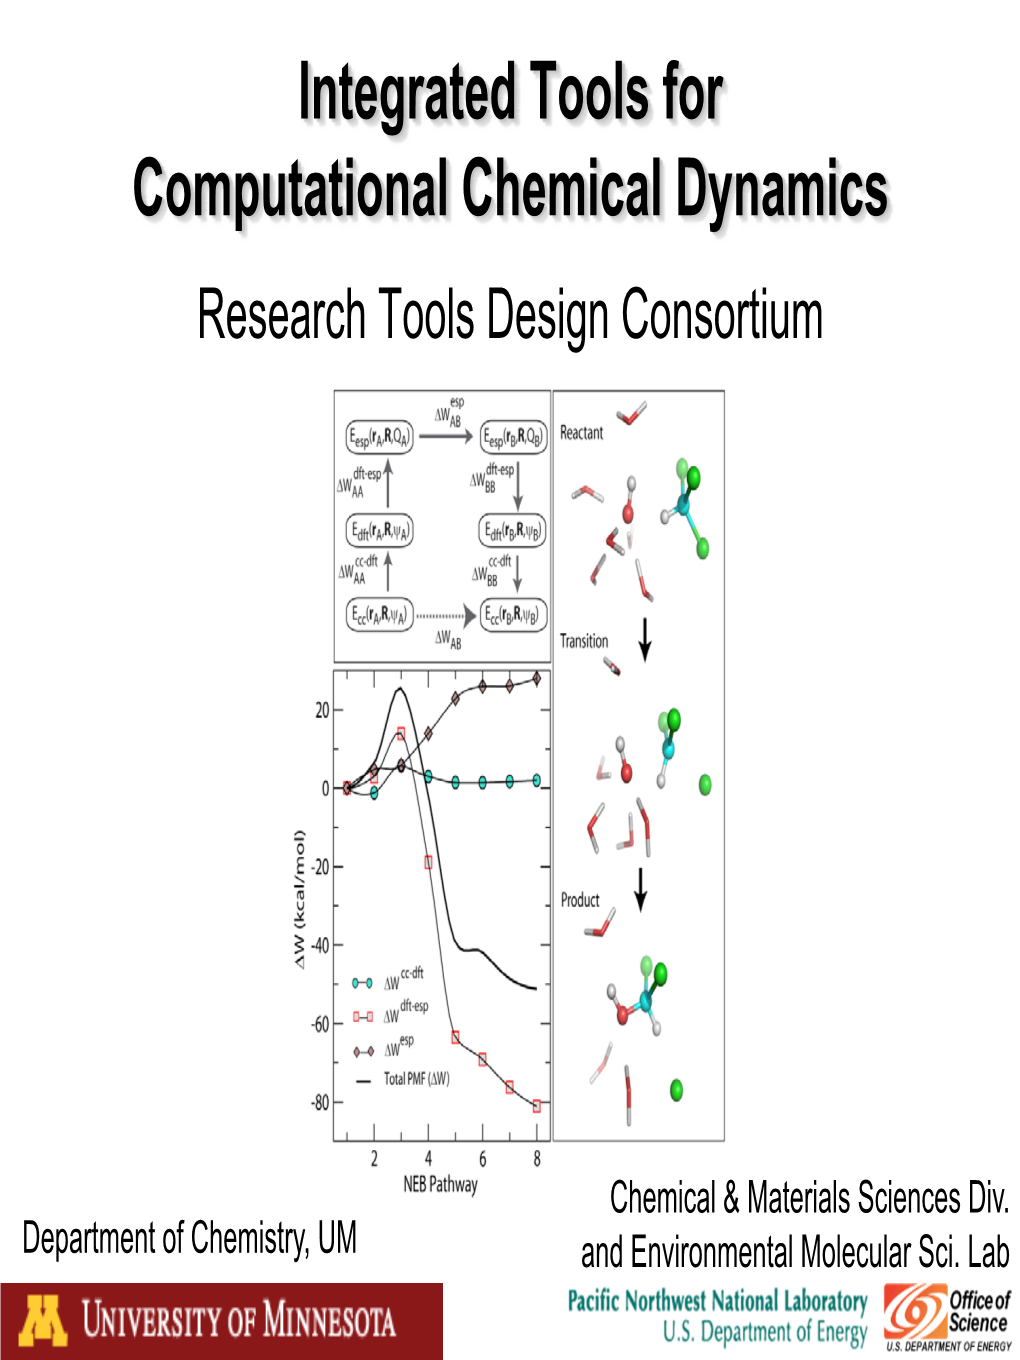 Integrated Tools for Computational Chemical Dynamics Research Tools Design Consortium